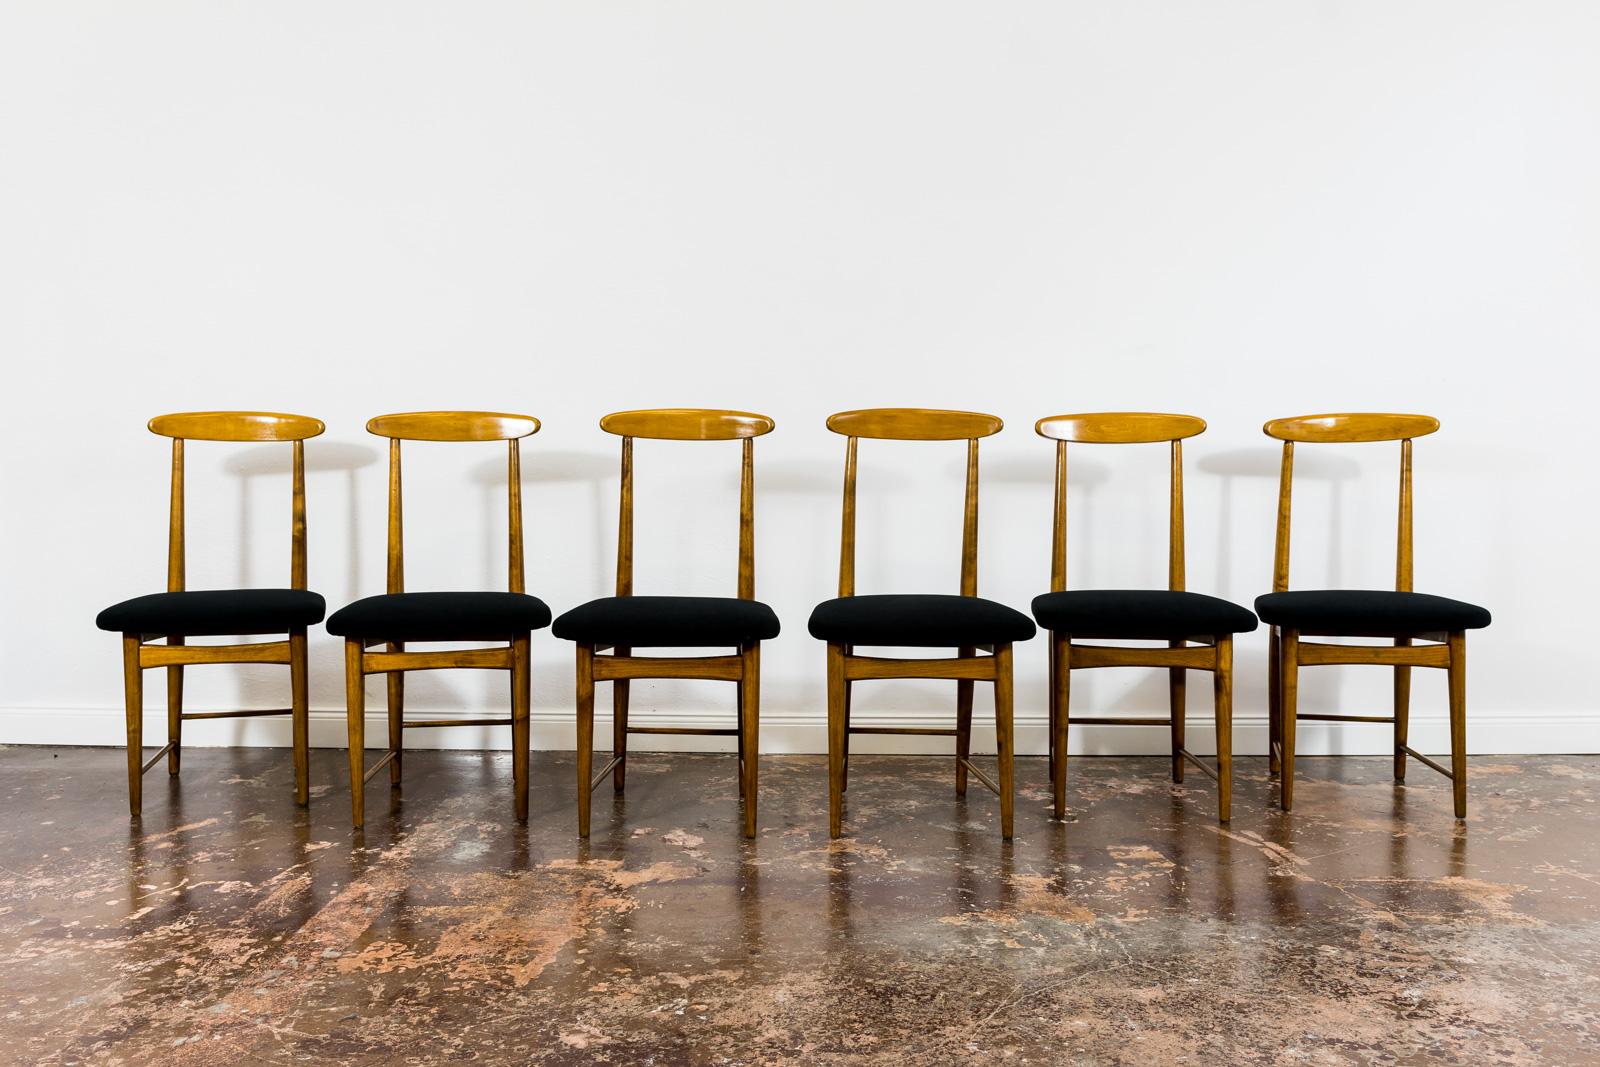 Set of 6 dining chairs designed by Bernard Malendowicz 1960's, Poland.
Chairs have been completely restored and refinished.
Upholstered seats in black easy to clean fabric.